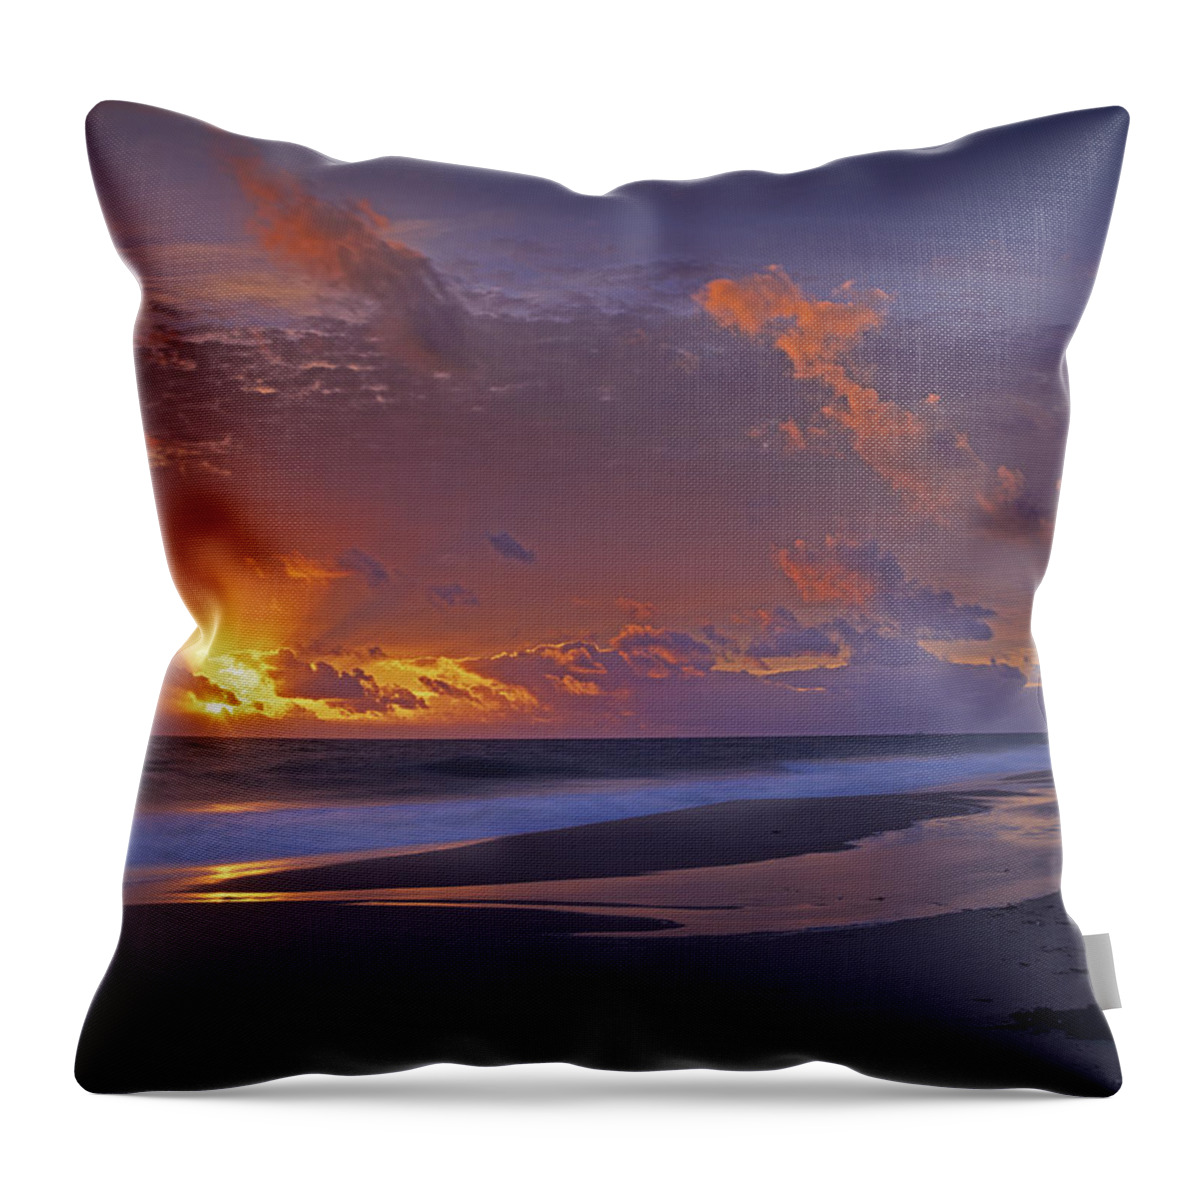 00175852 Throw Pillow featuring the photograph McArthur Beach At Sunrise by Tim Fitzharris